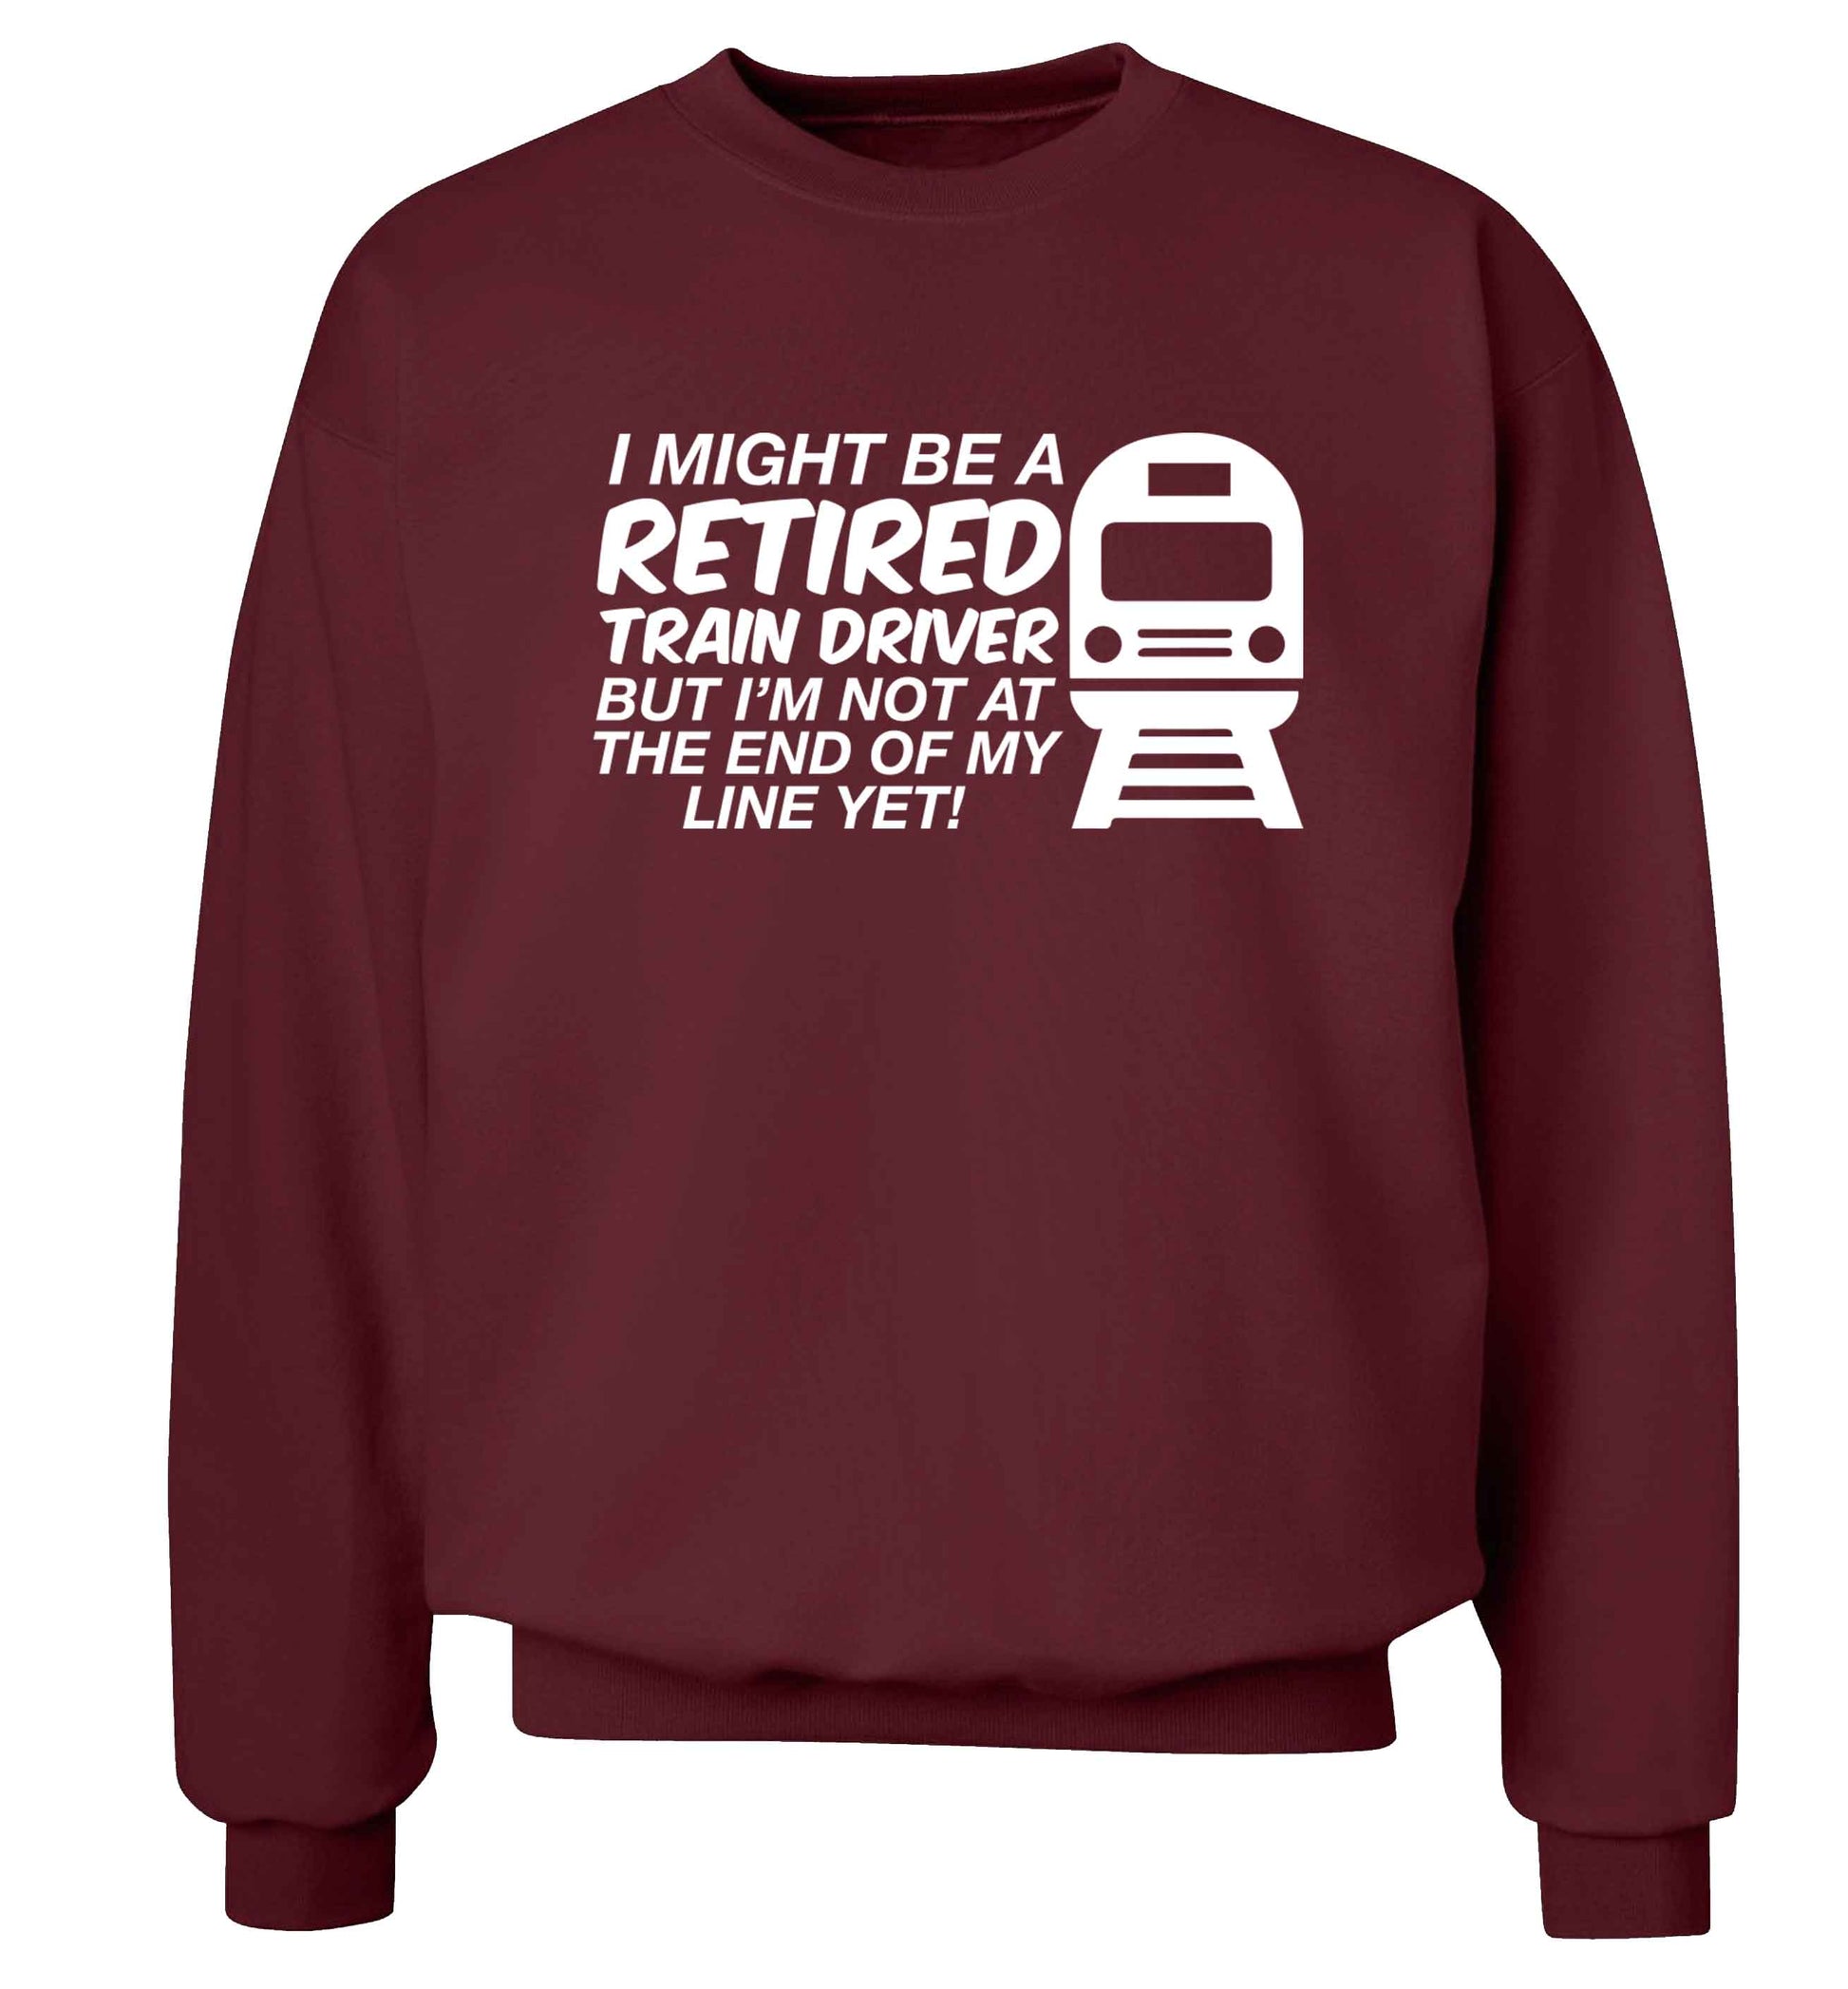 Retired train driver but I'm not at the end of my line yet Adult's unisex maroon Sweater 2XL